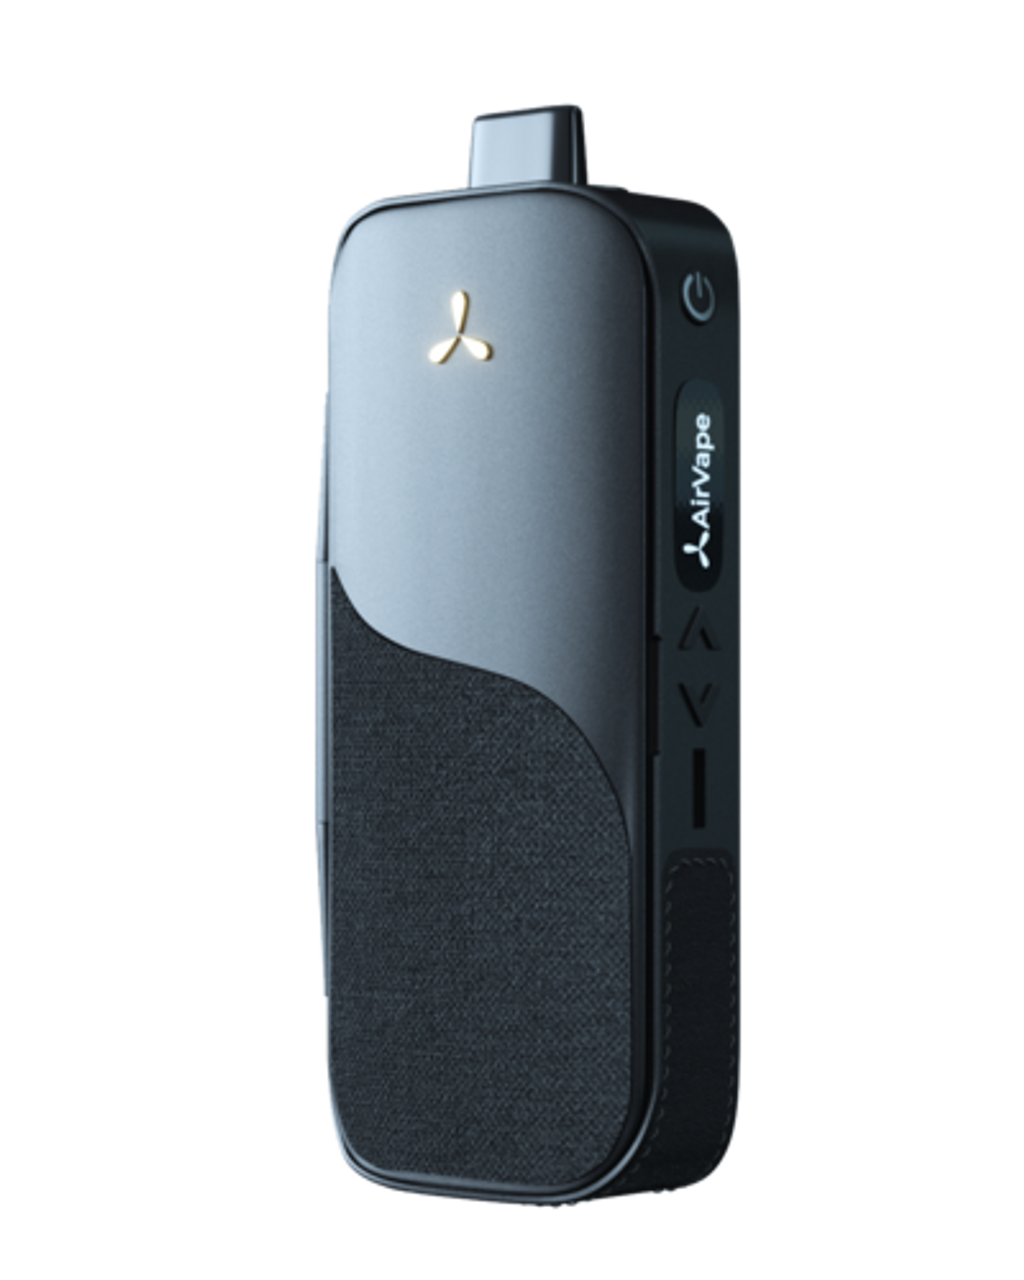 AirVape Legacy Portable Vaporizer in Black with Hemp and Ceramic, Side View on White Background